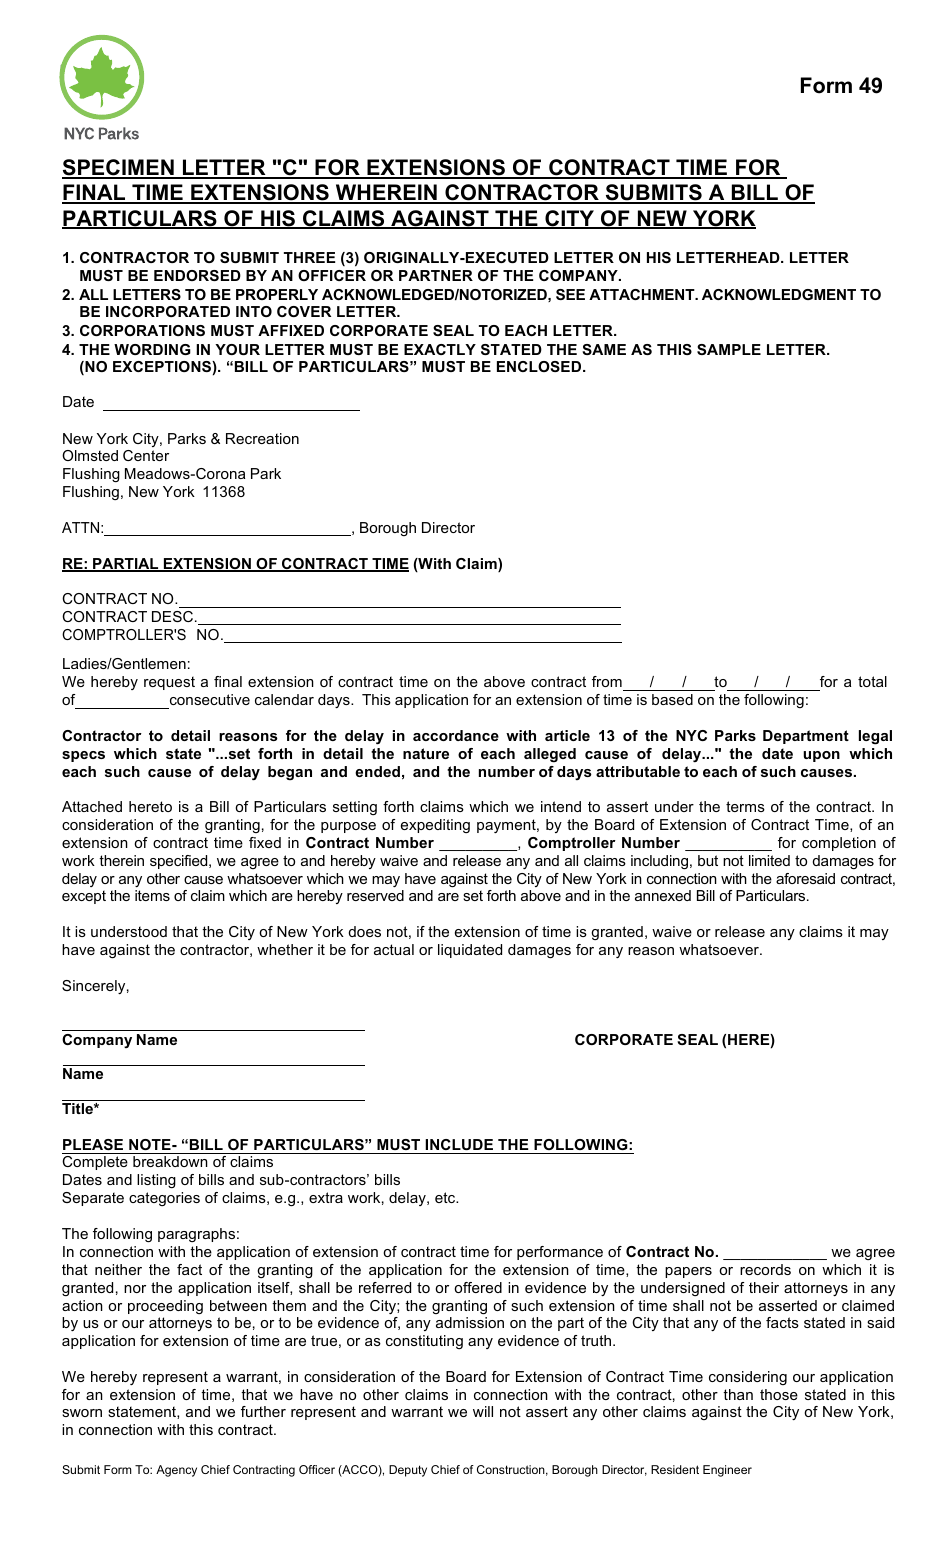 Form 49 Specimen Letter c for Extensions of Contract Time for Final Time Extensions Wherein Contractor Submits a Bill of Particulars of His Claims Against the City of New York - New York City, Page 1